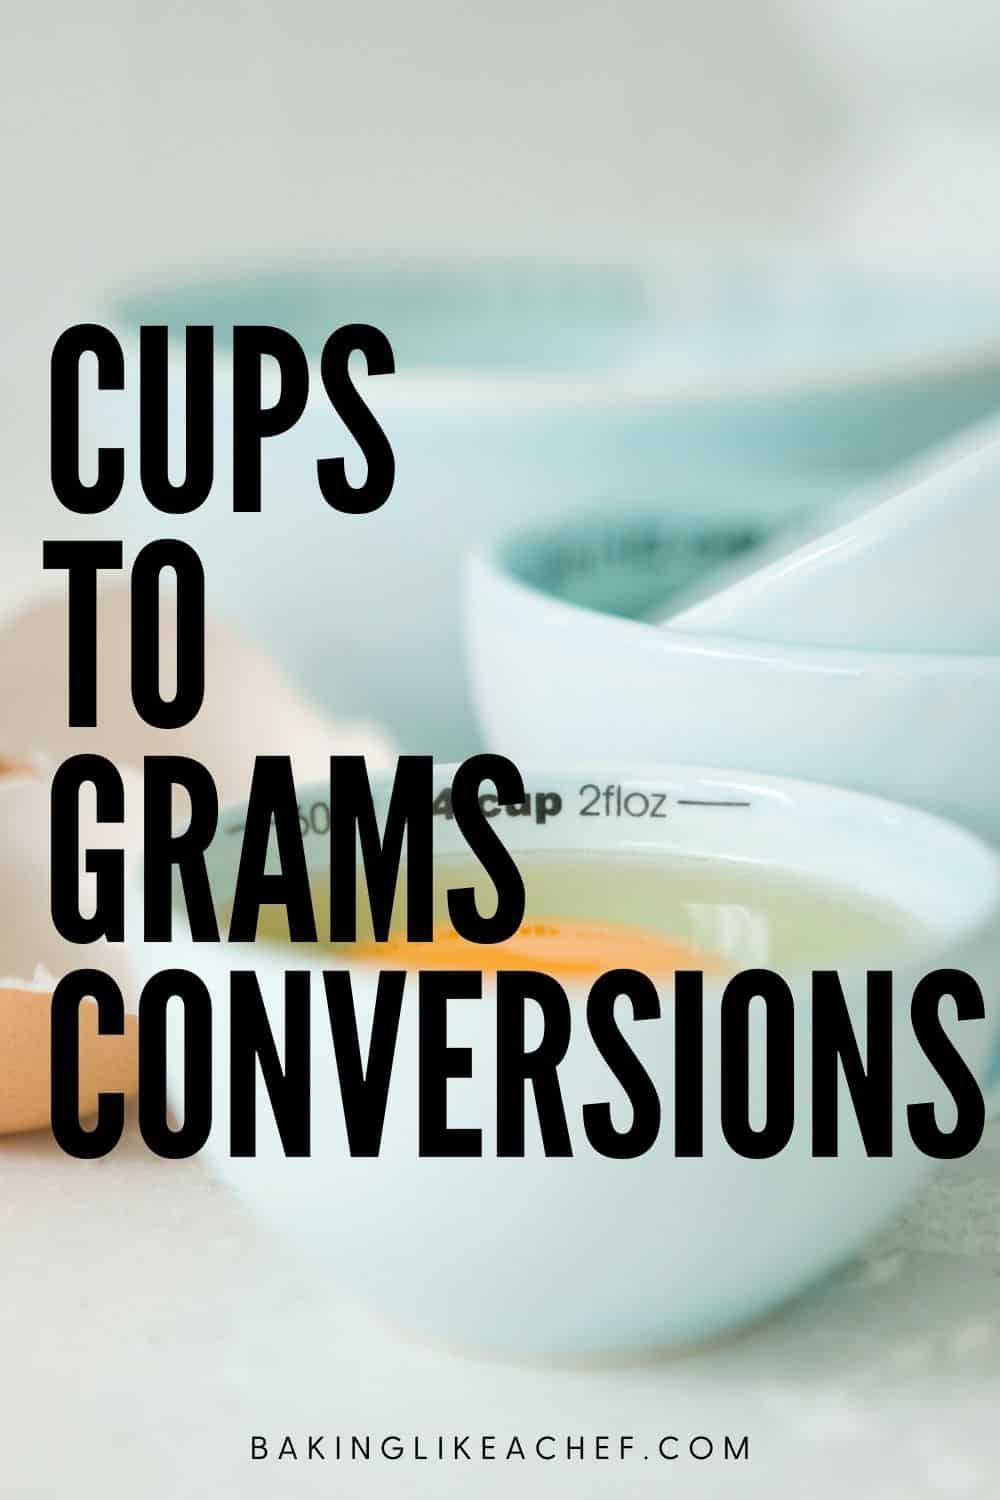 Baking cups with grams and ounces conversions; filled with egg yolks: Pin with text